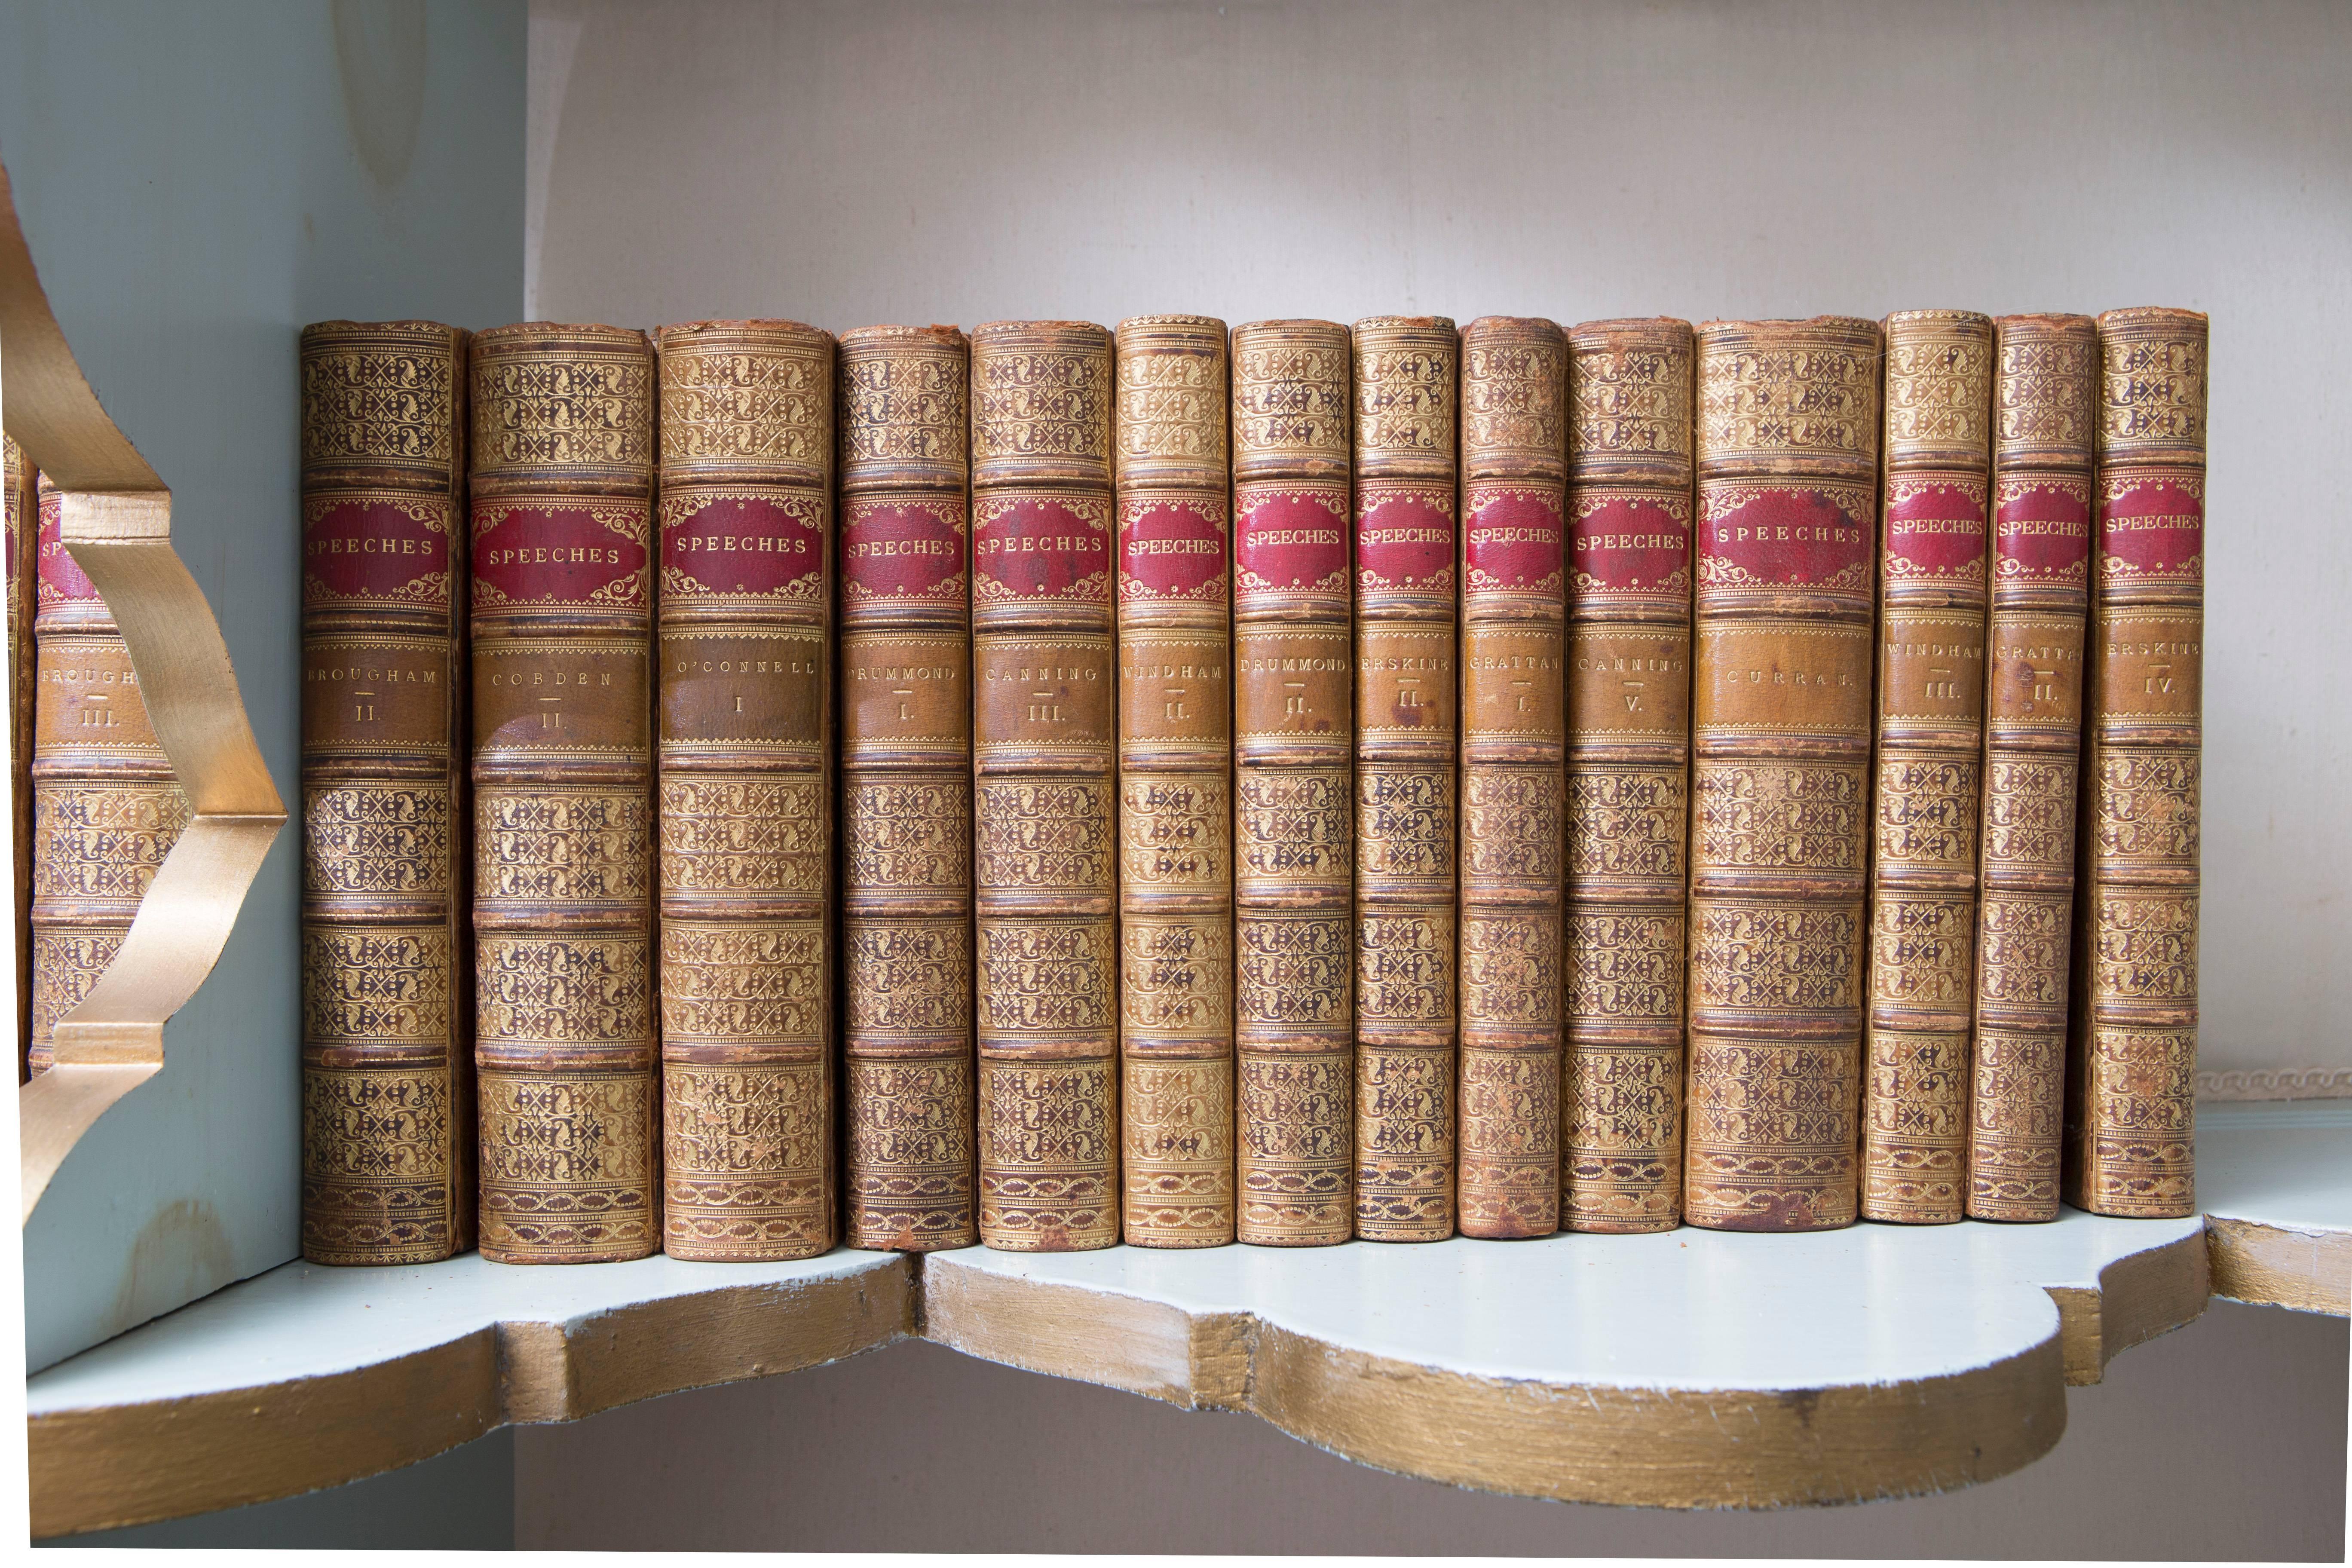 A stunningly crafted collection of books entitled Speeches. Each volume contains a compilation of speeches by political figures in Europe during the 1800s, including Brougham, Cobden, Grattan, O'Connell and Windham. The collection contains 29 books,